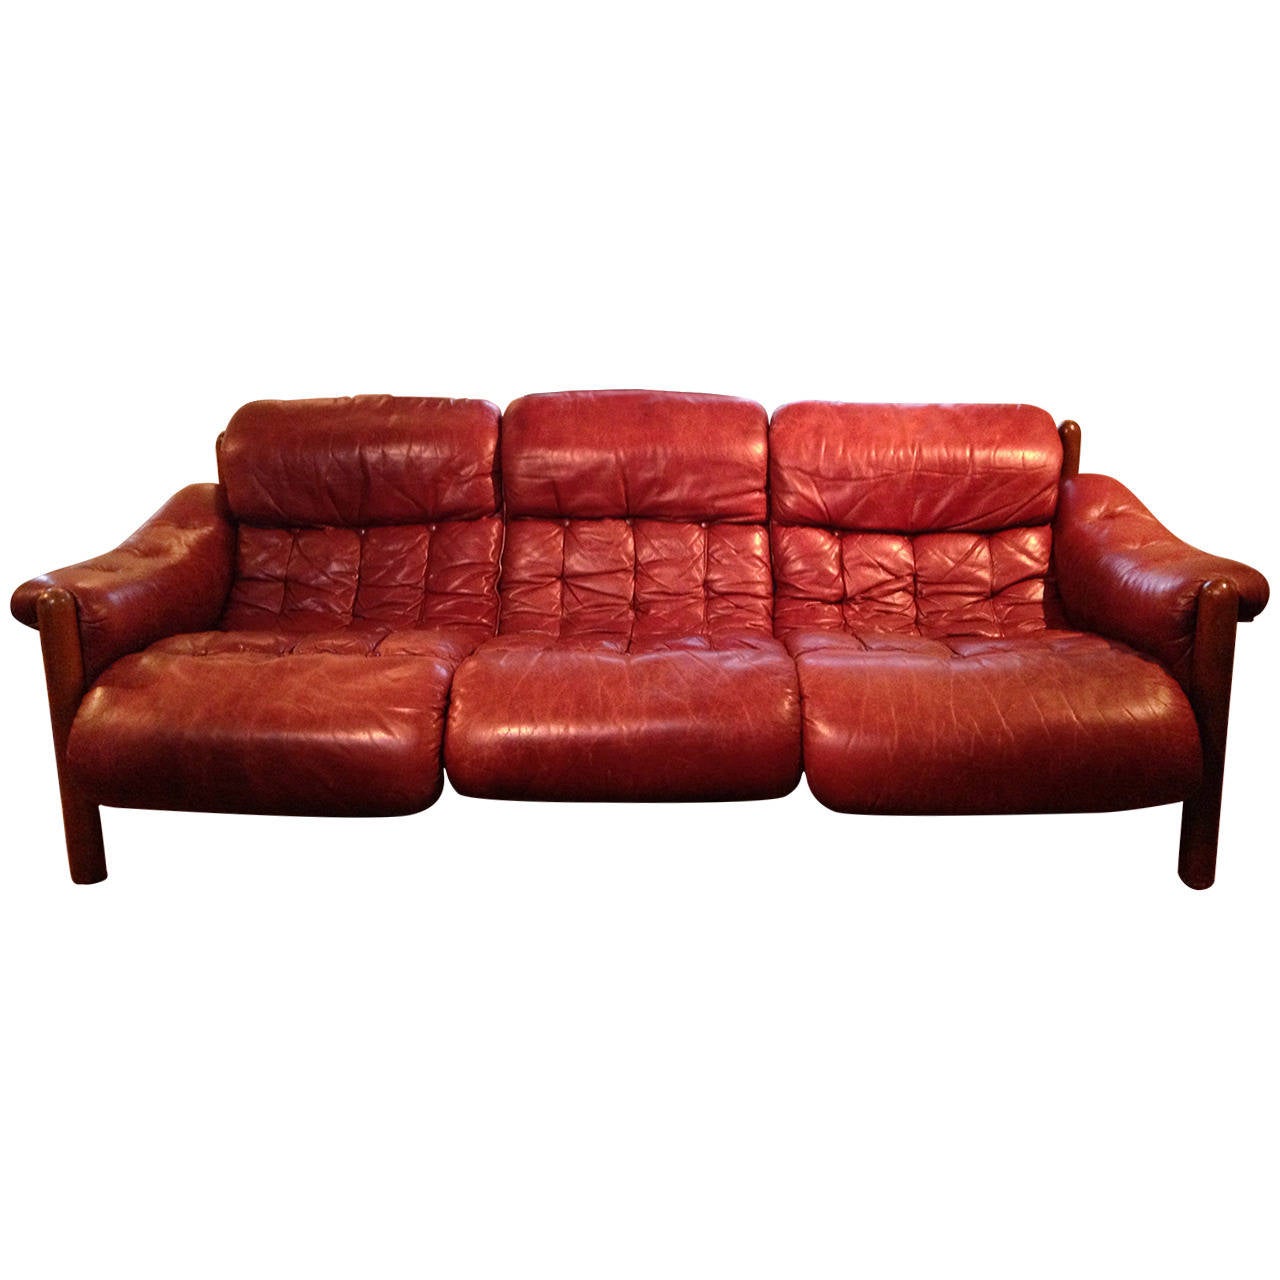 Vintage Danish Rosewood Sofa in Oxblood Leather, circa 1960s For Sale